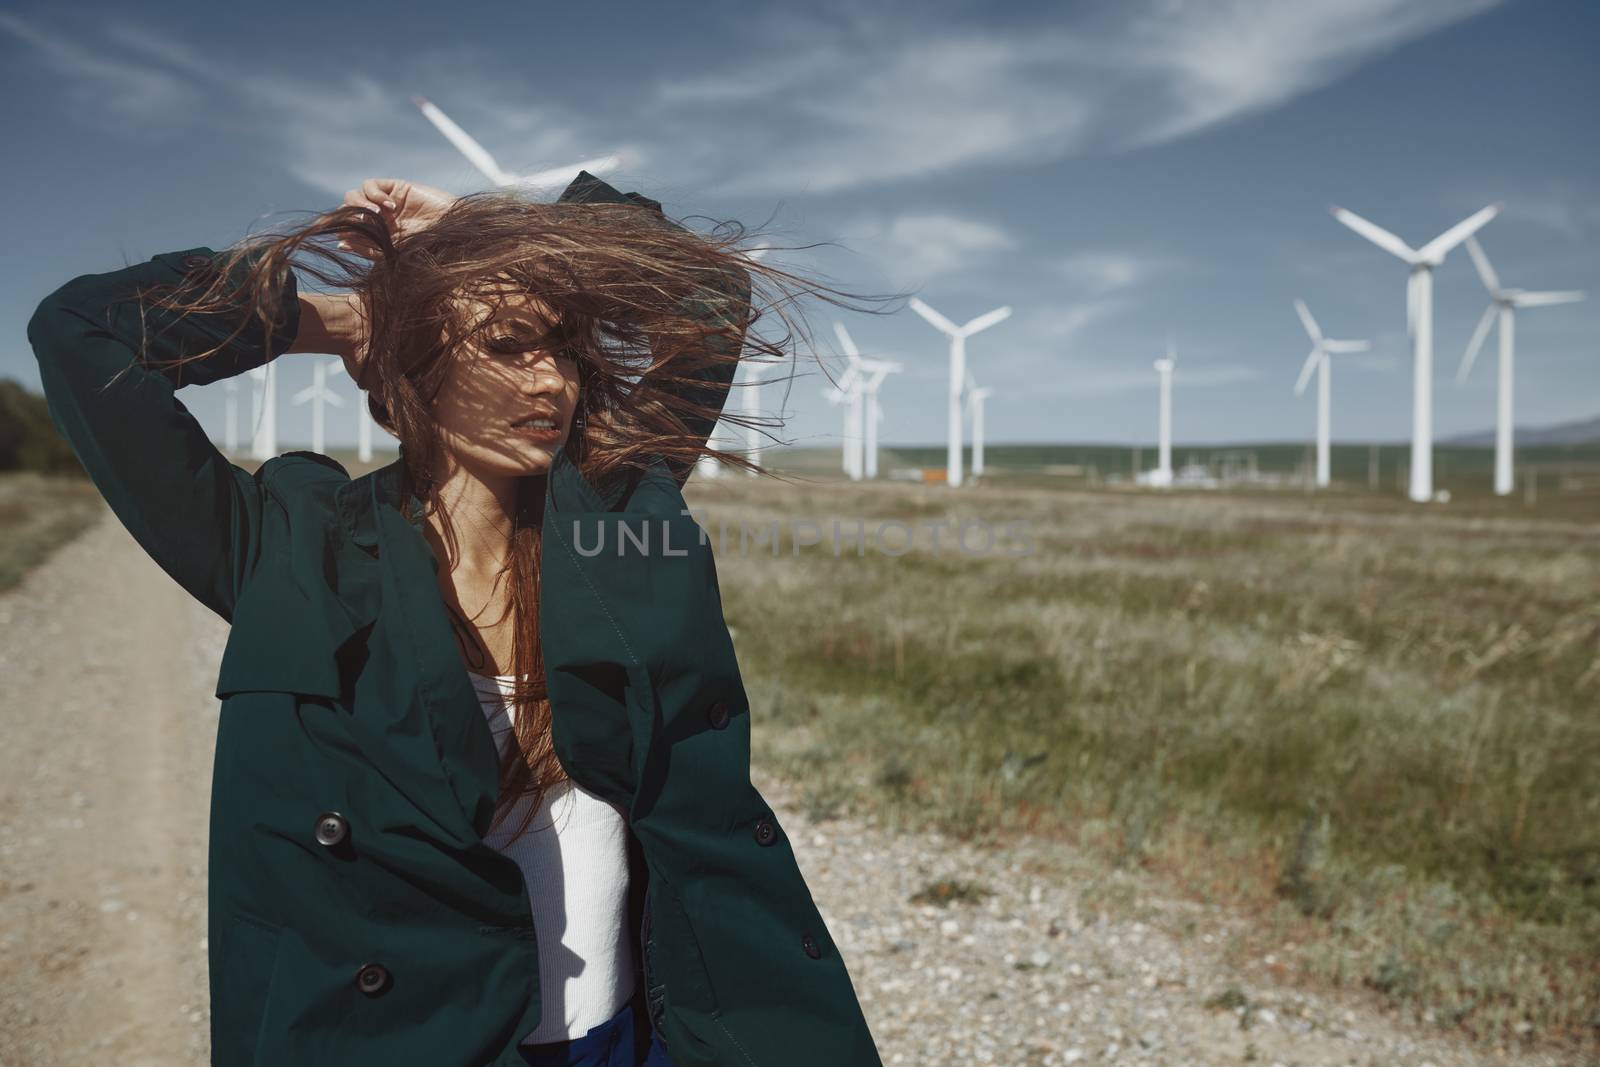 Woman with long tousled hair next to the wind turbine with the w by Novic